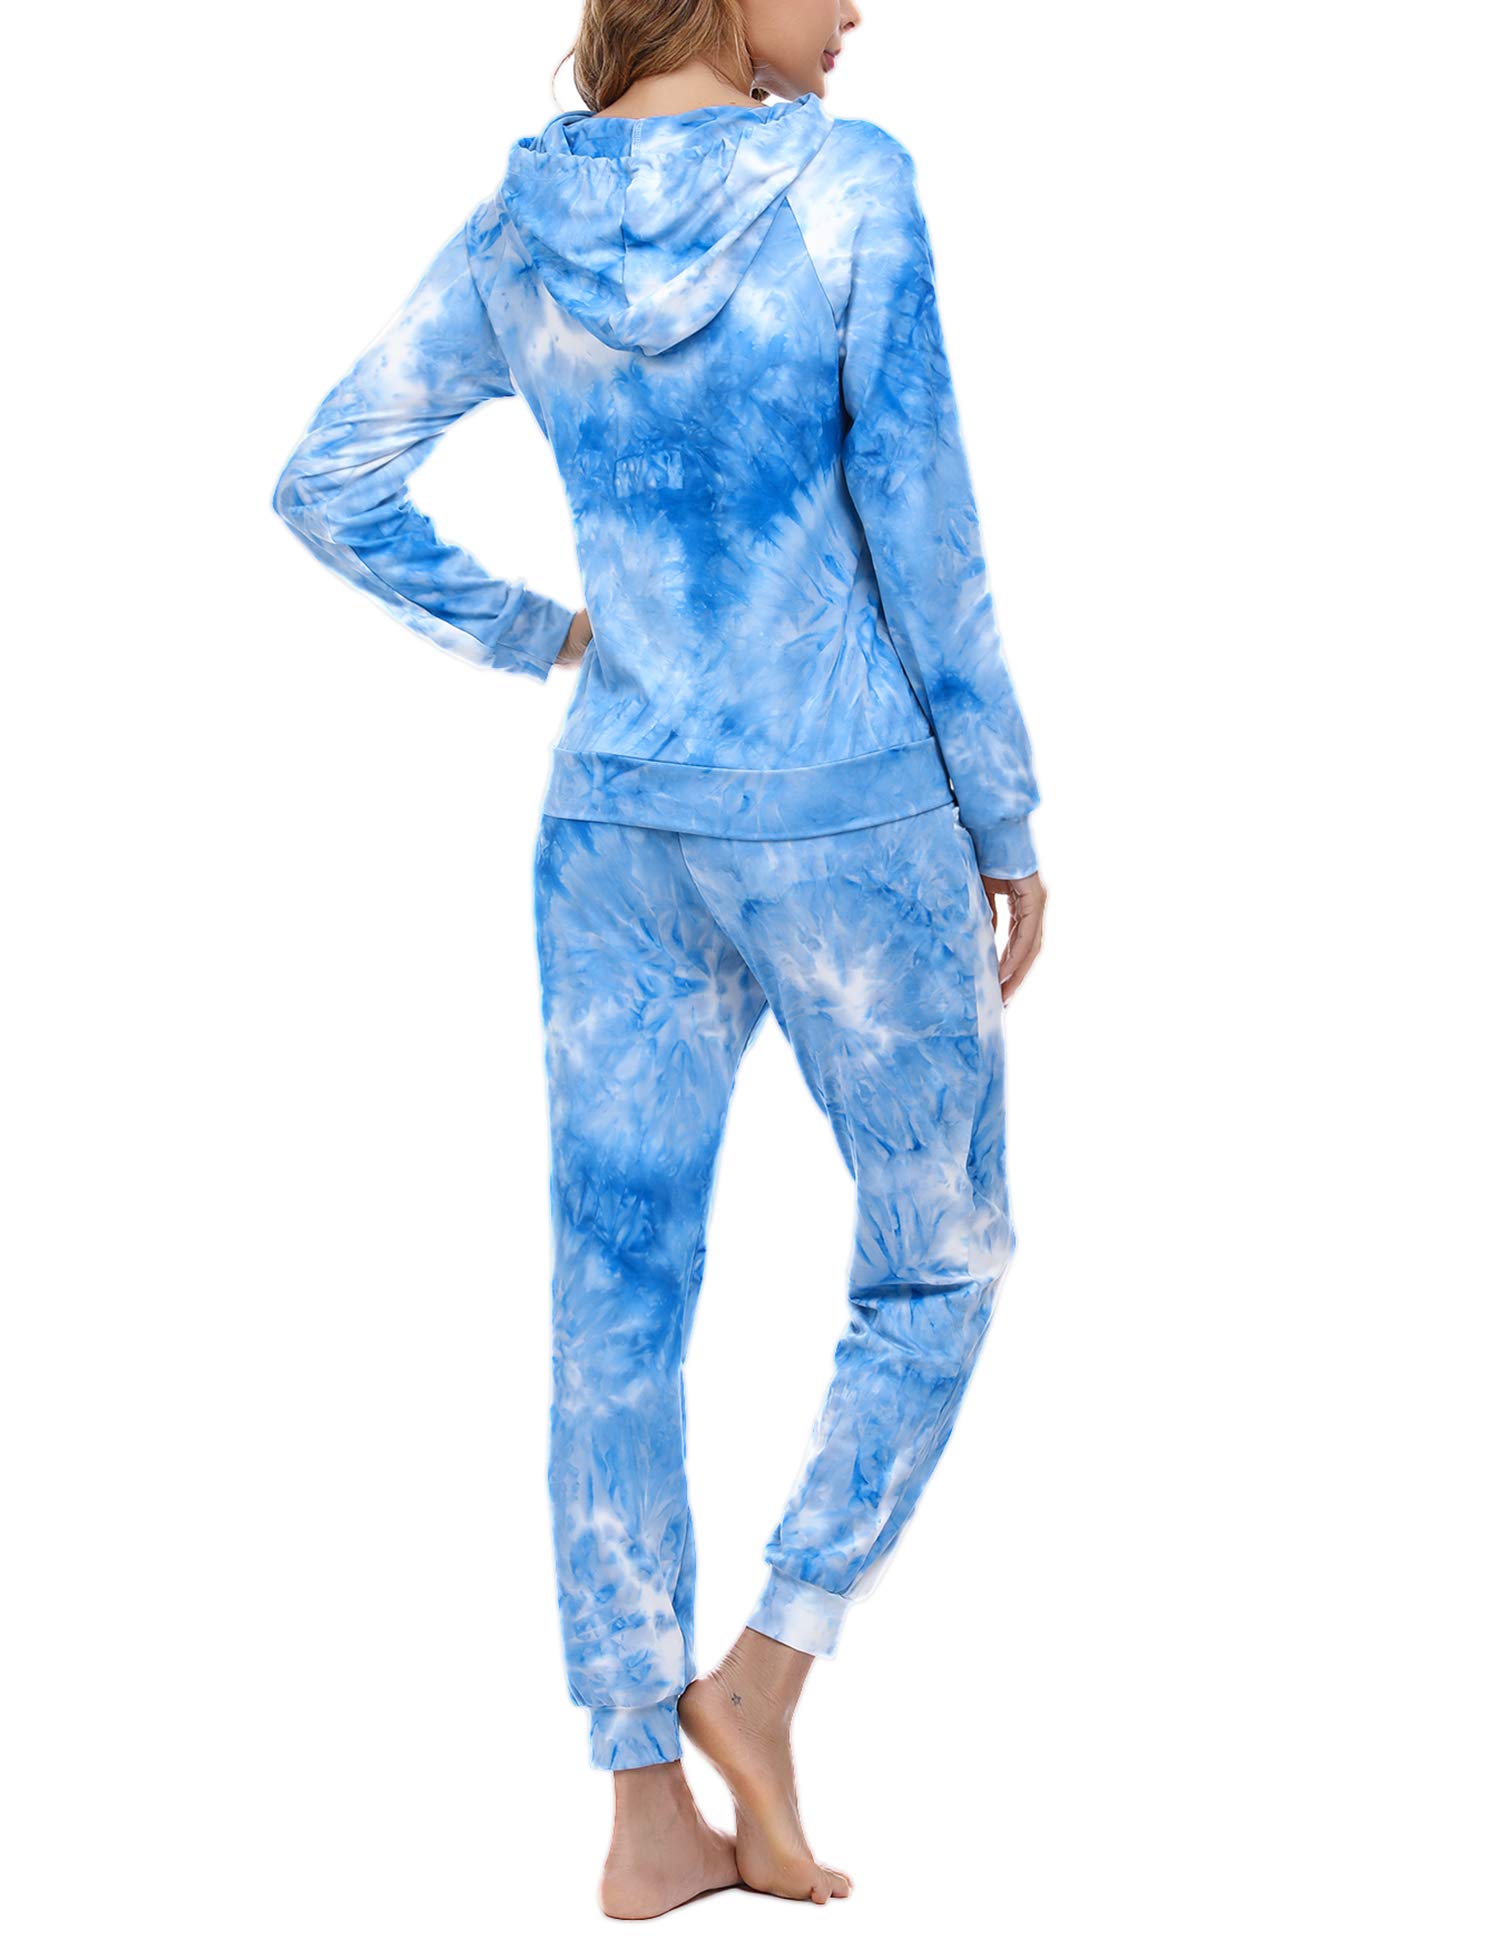 Aibrou Womens Casual Tie Dye Sweatsuit 2 Piece Long Sleeve Hooded Pullover Sweatshirt Drawsting Pants with Pockets Set